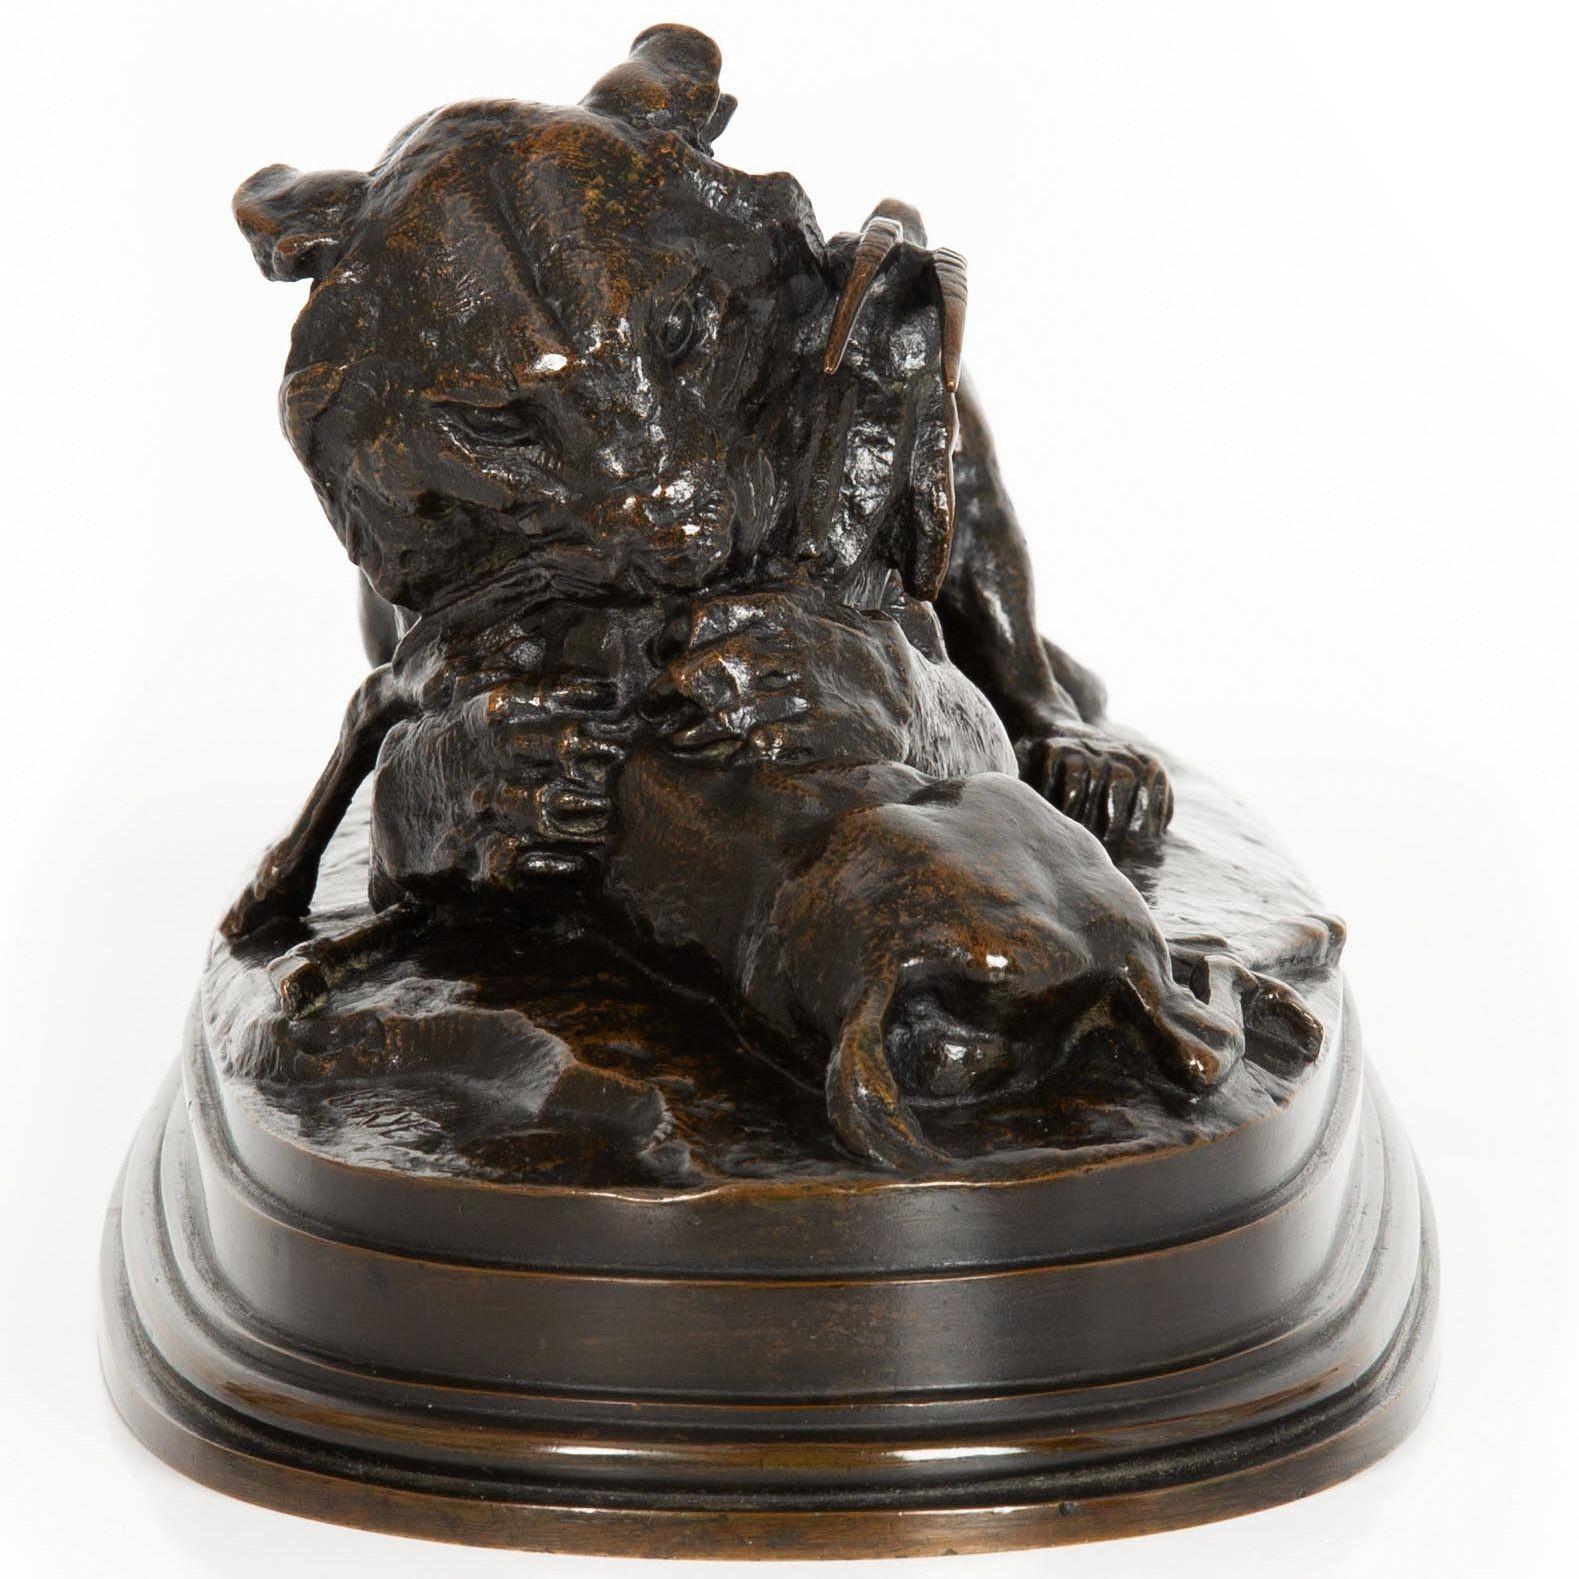 French Bronze Sculpture “Tiger Devouring Gazelle” after Antoine-Louis Barye In Good Condition For Sale In Shippensburg, PA